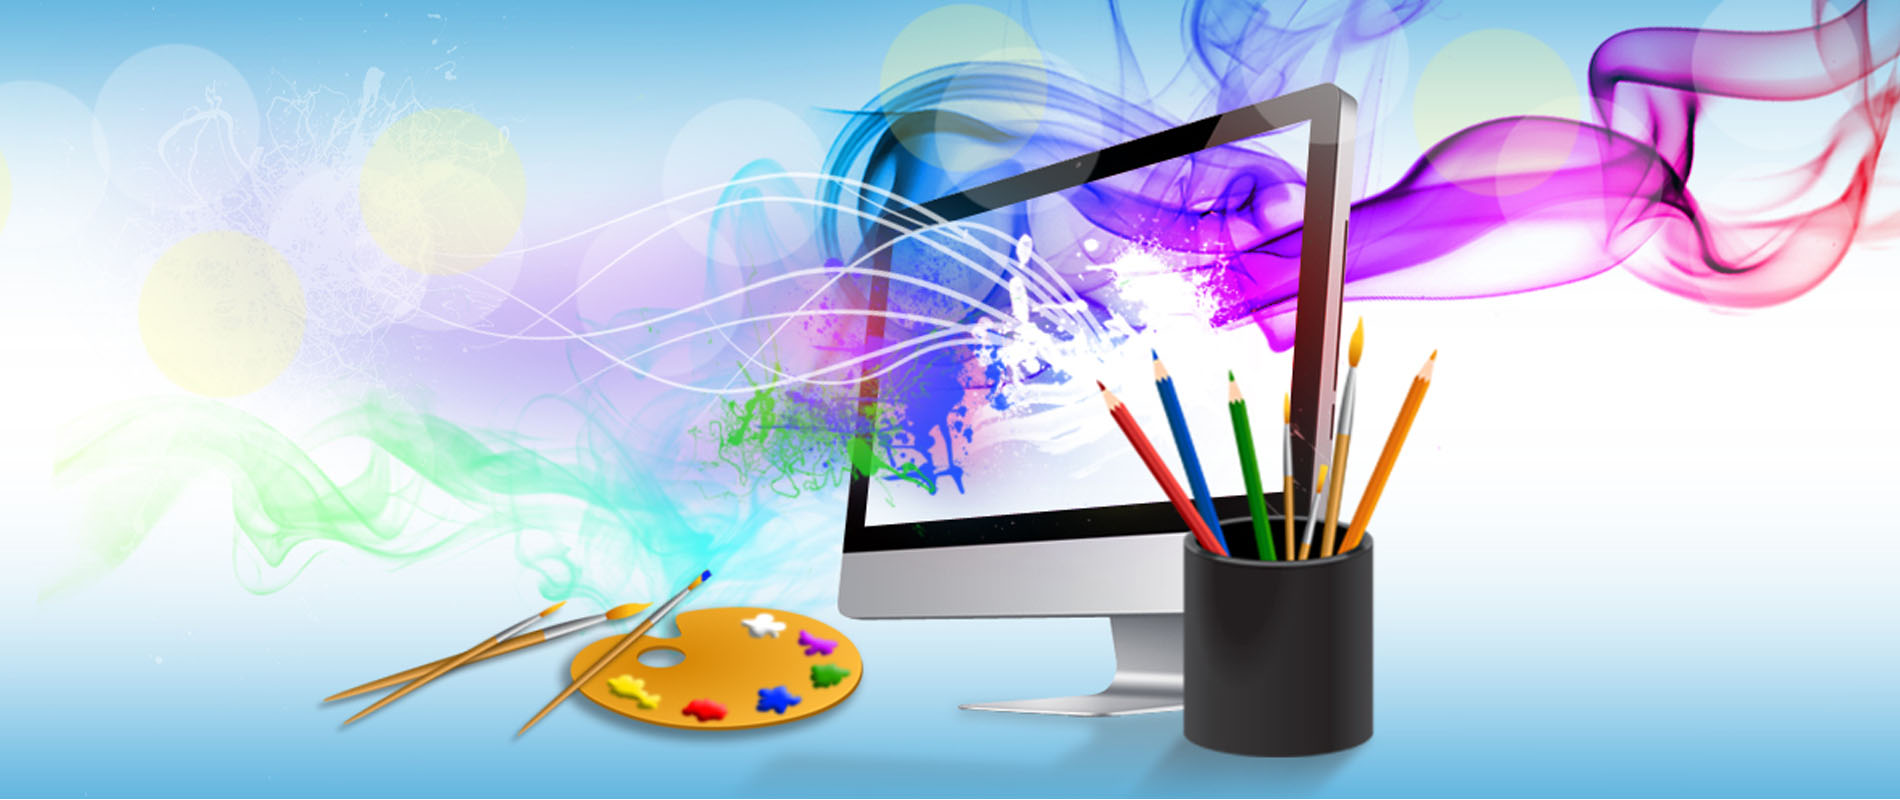 Graphic Designing: The Skill in Demand